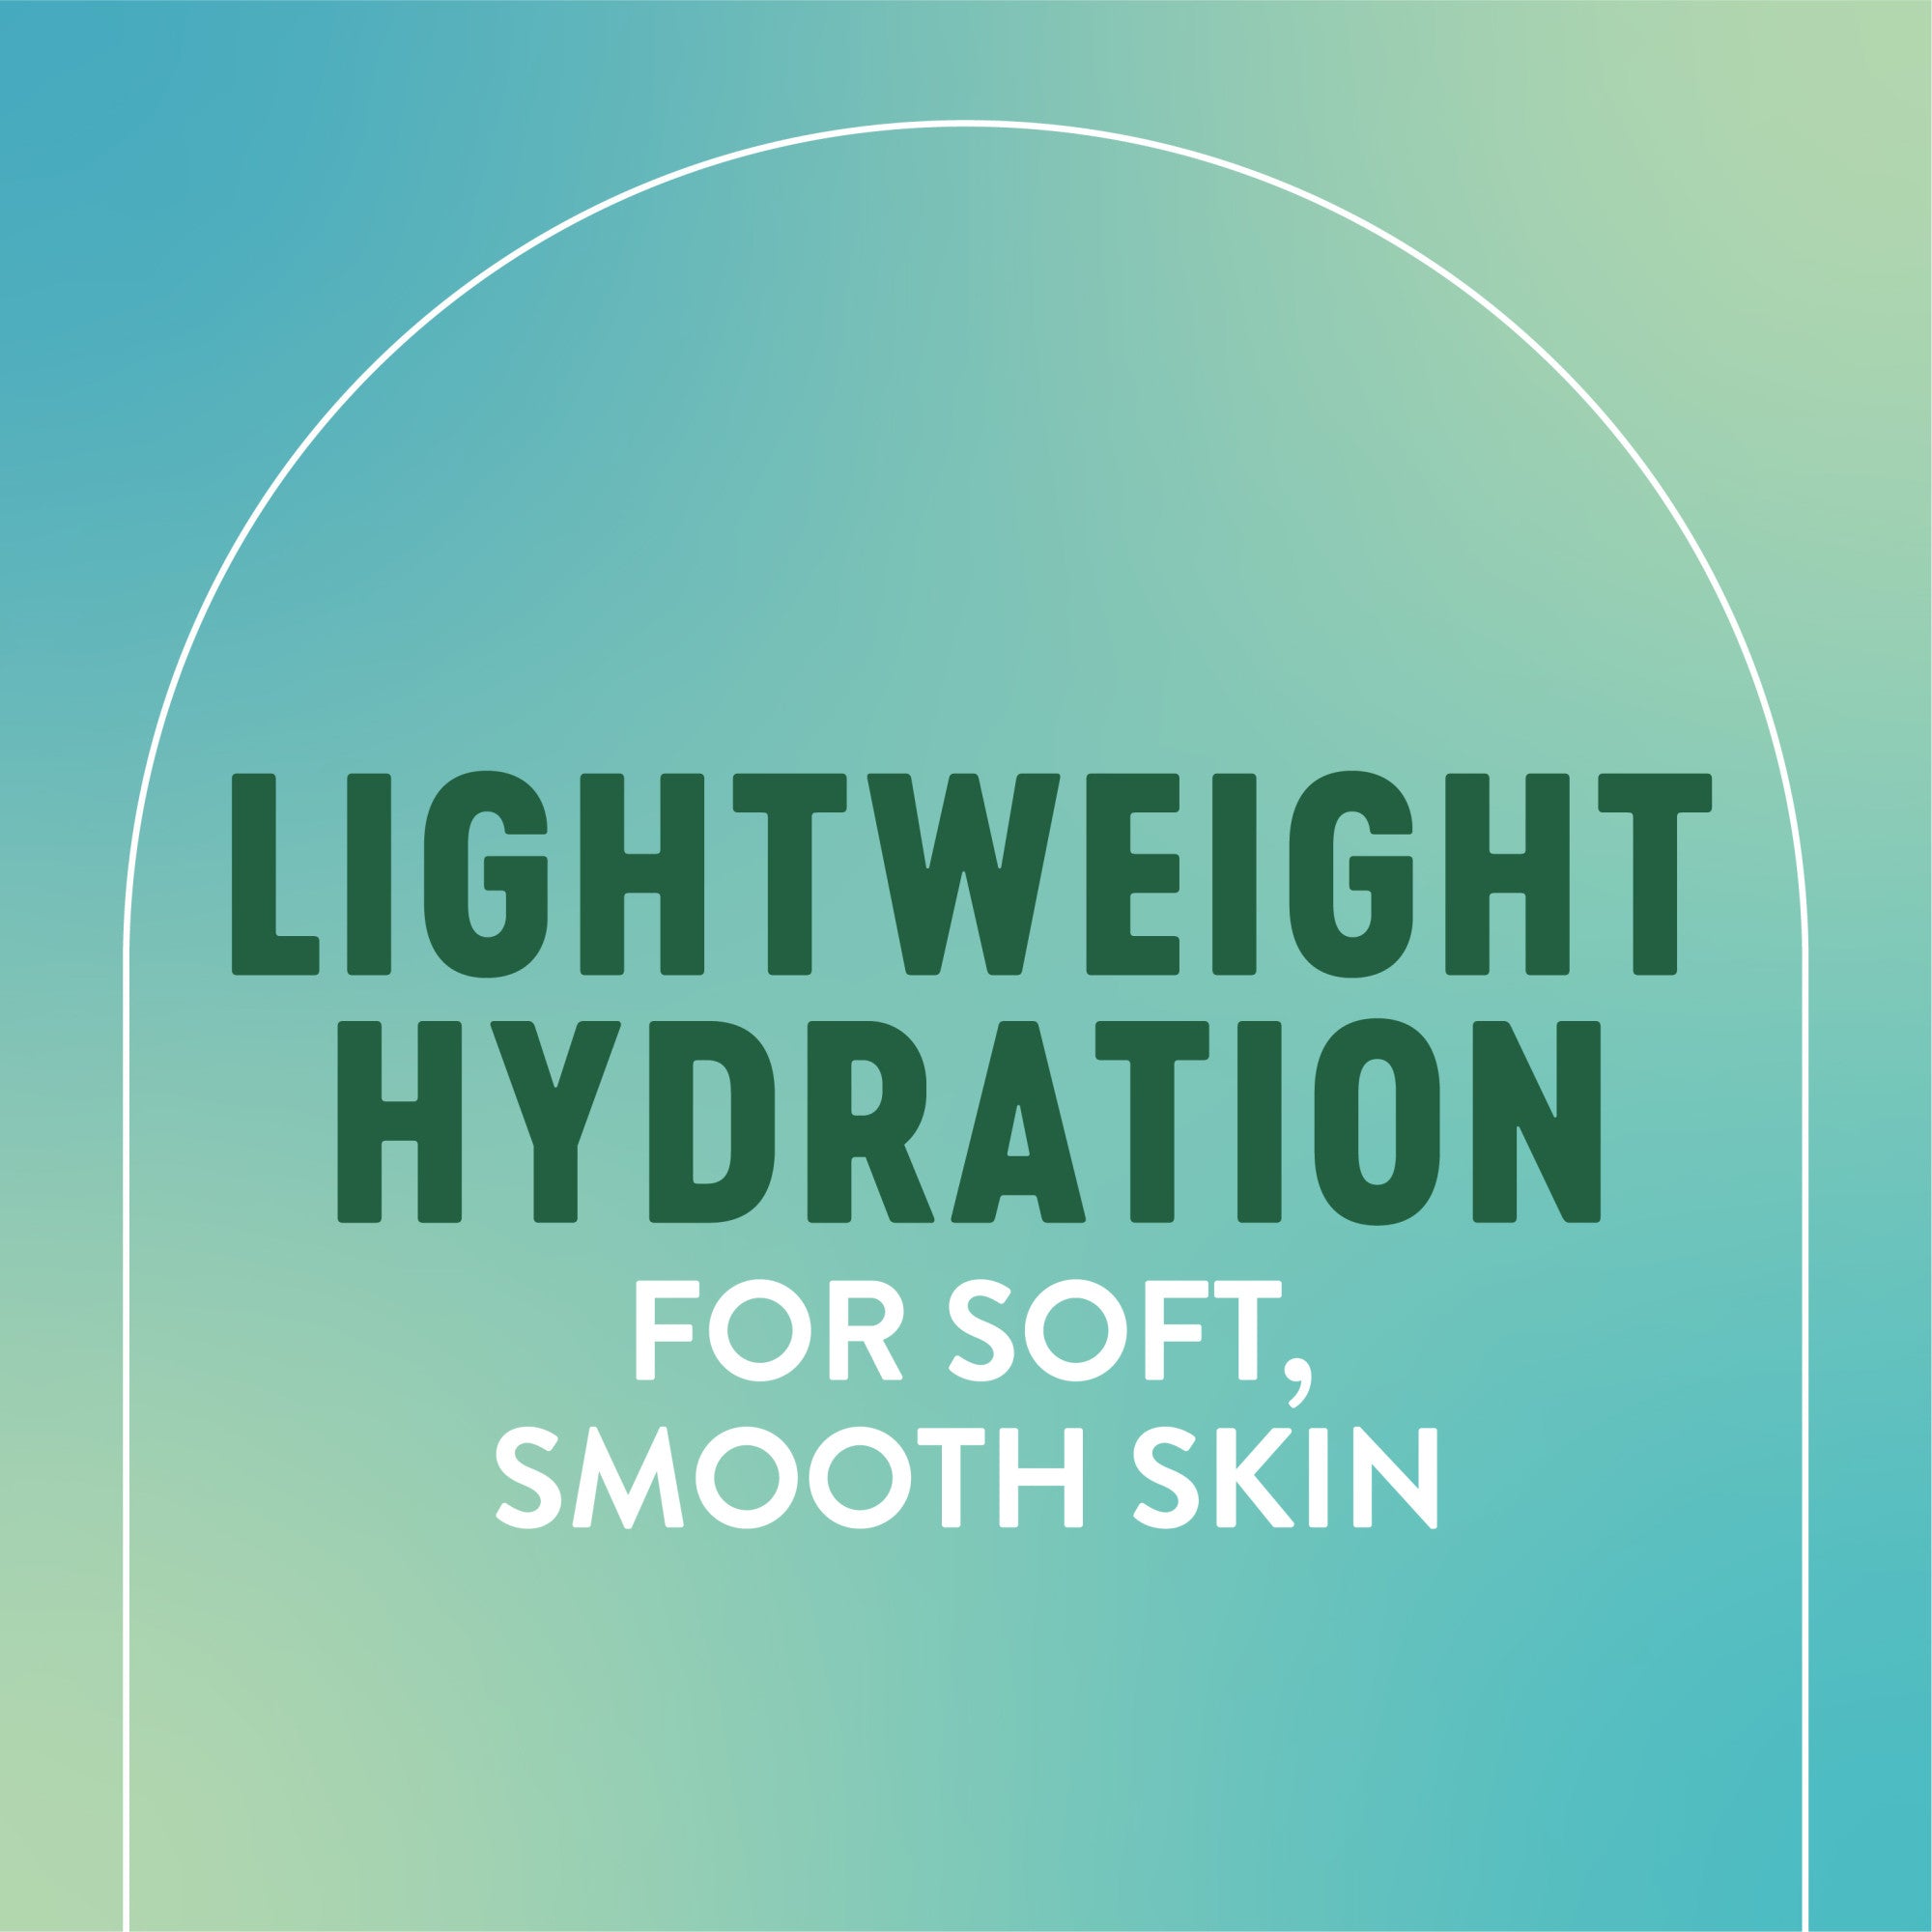 Lightweight hydration for soft, smooth skin.